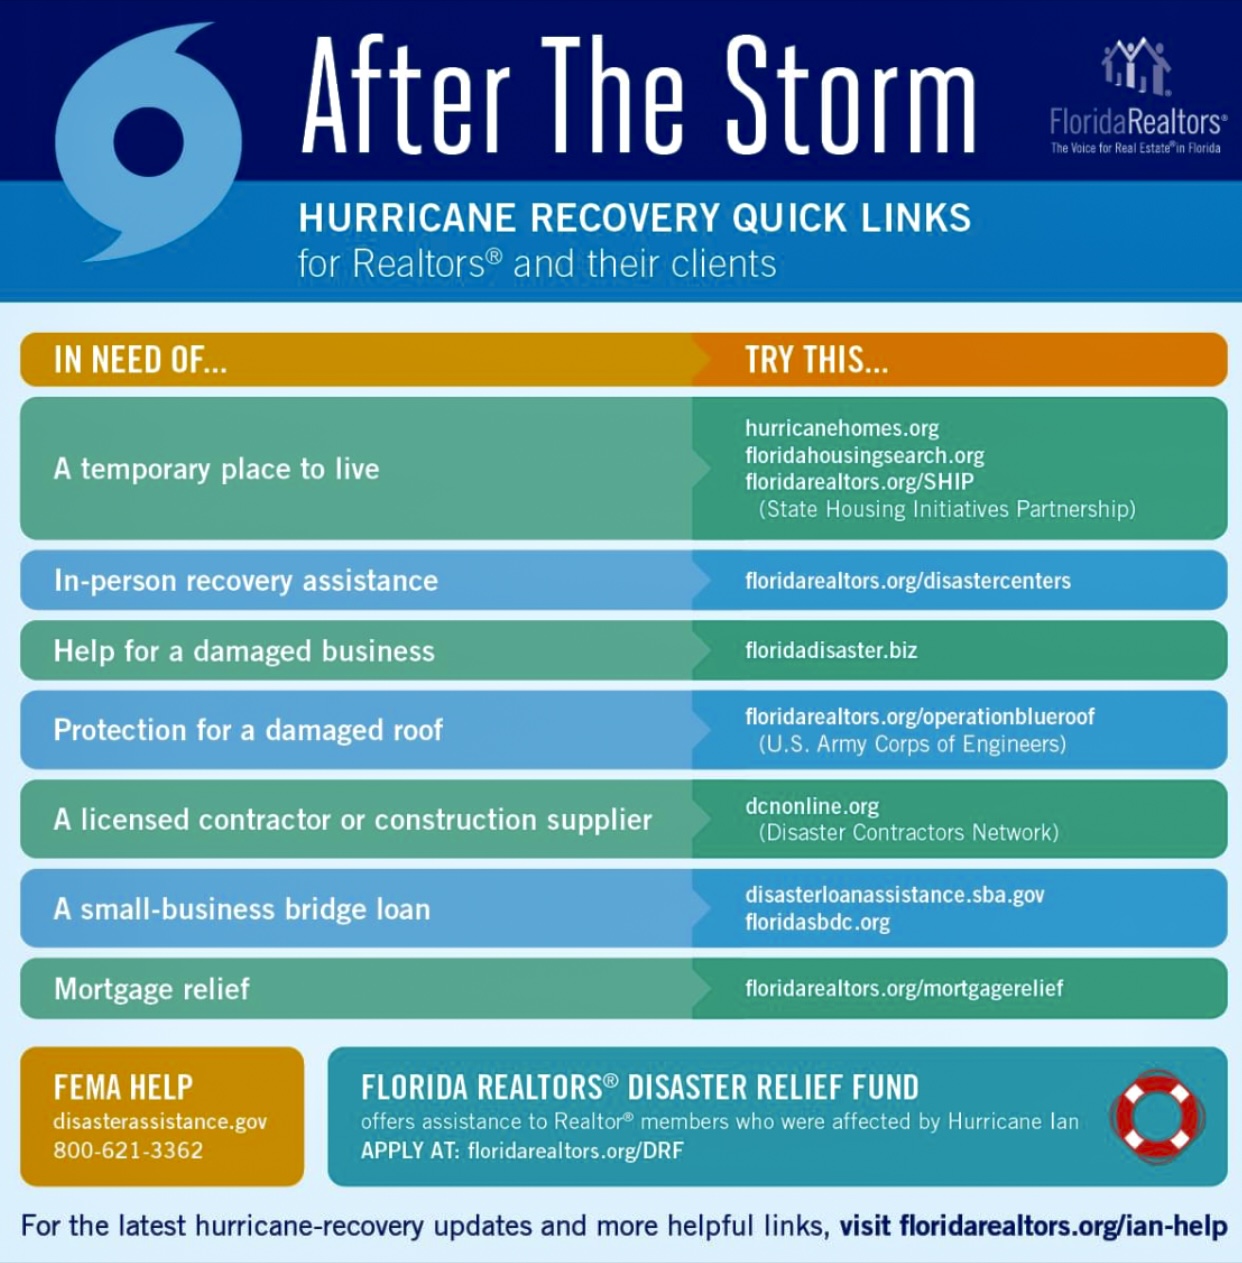 After the Storm Hurricane Recovery Quick Links Graphic from Florida Realtors